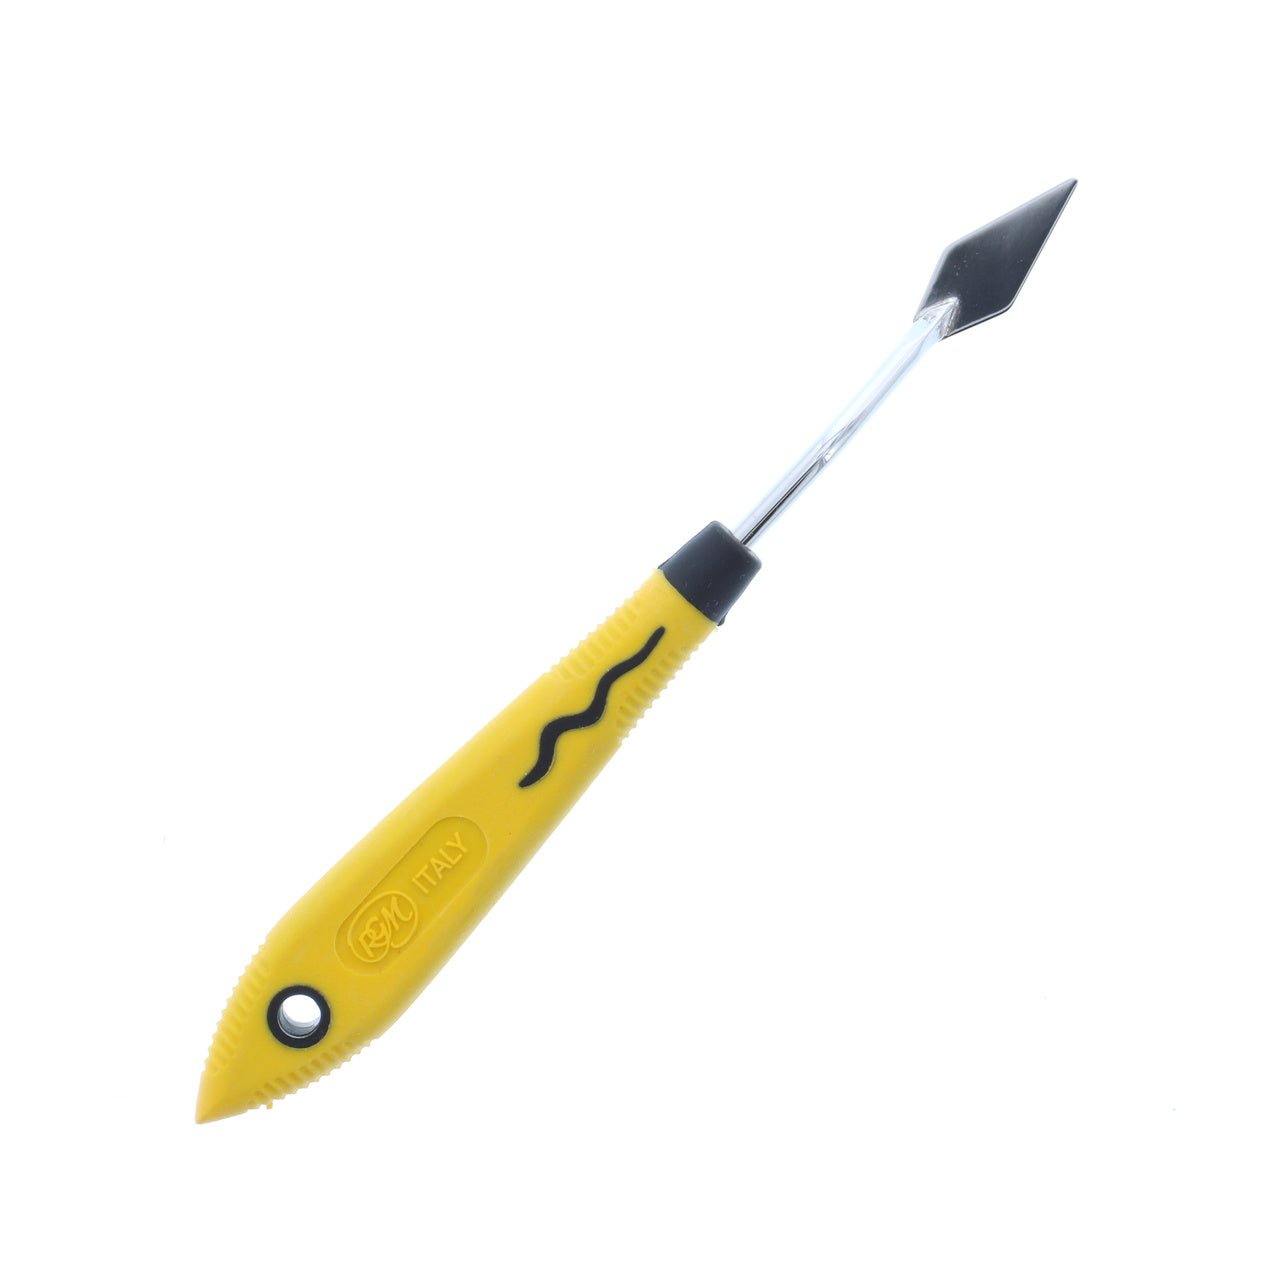 RGM Soft Grip Painting Knife #040 (Yellow Handle)